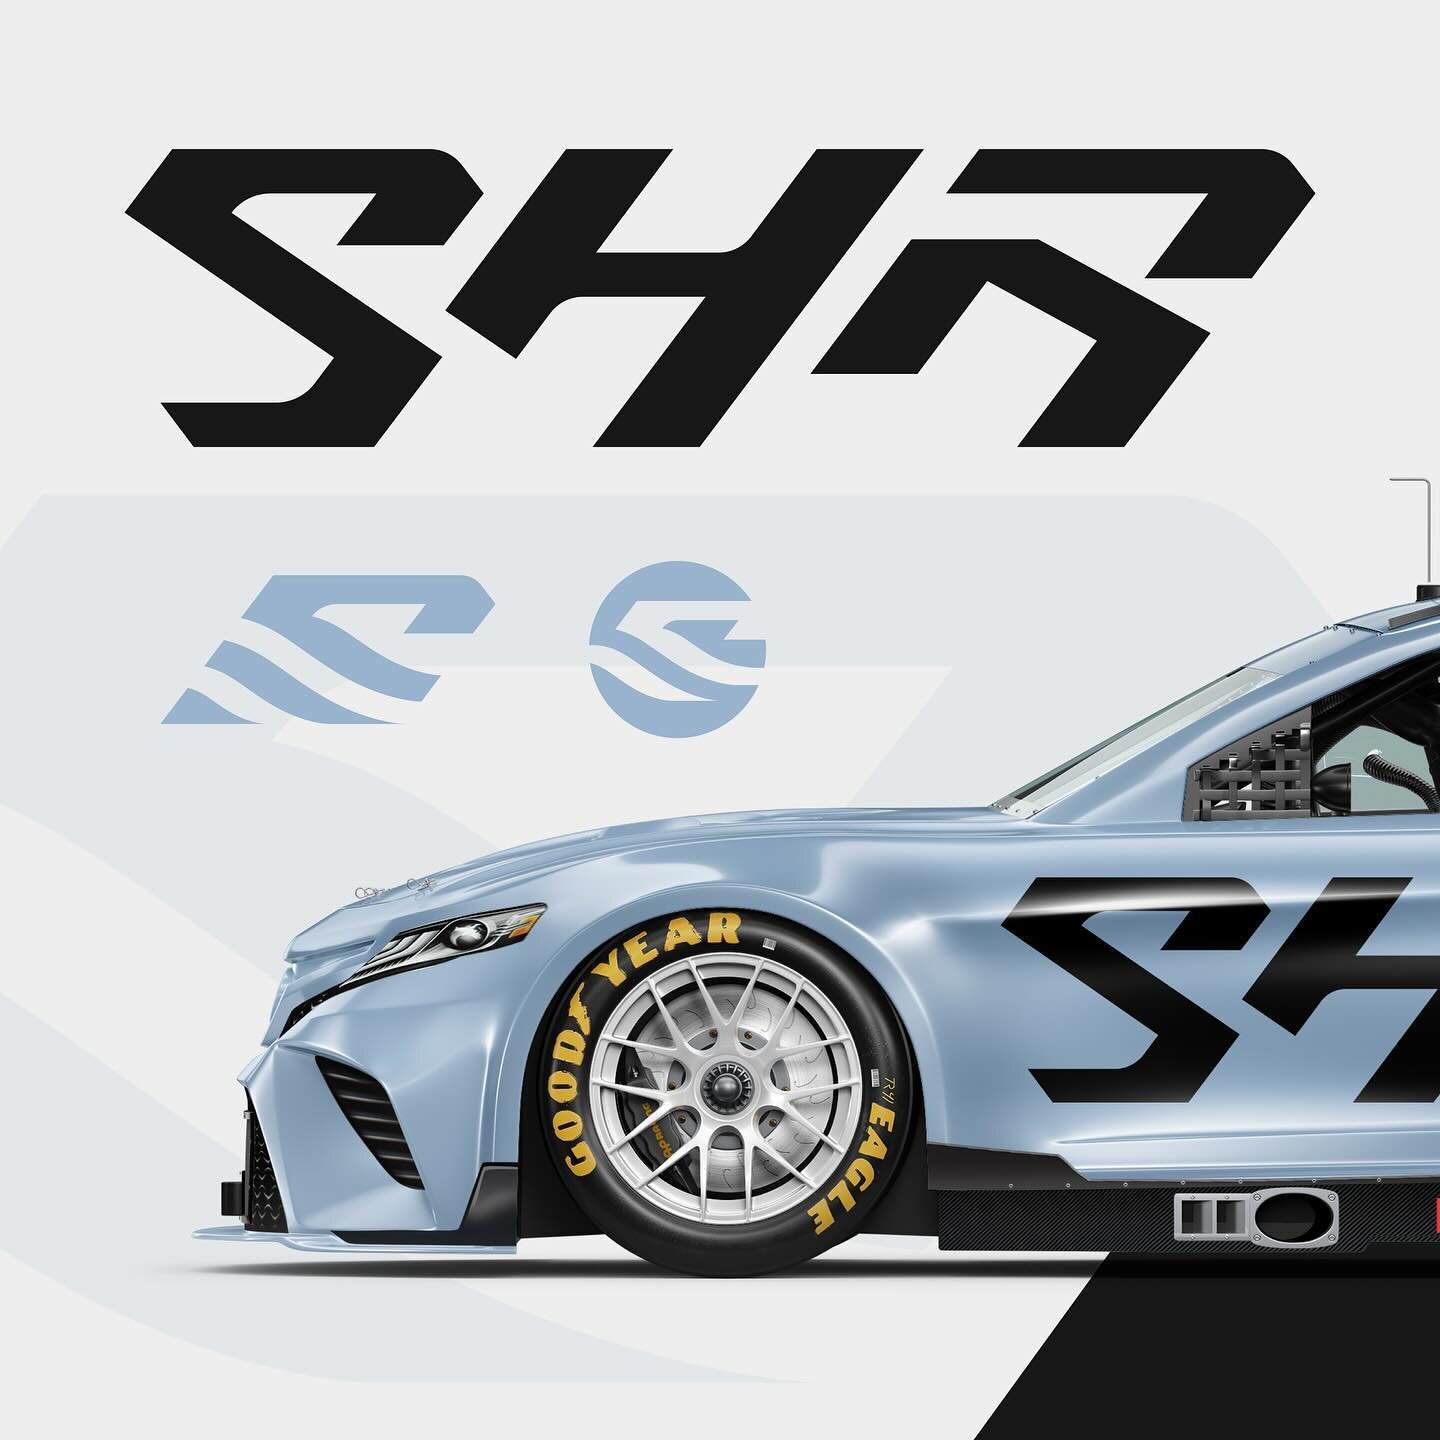 Grateful for the opportunity to design logo concepts for Tony Stewart&rsquo;s NASCAR team Stewart-Haas Racing. Custom typography, letter-marks, and icons. This project actually took place near the beginning of 2023 but I wasn&rsquo;t able to share un